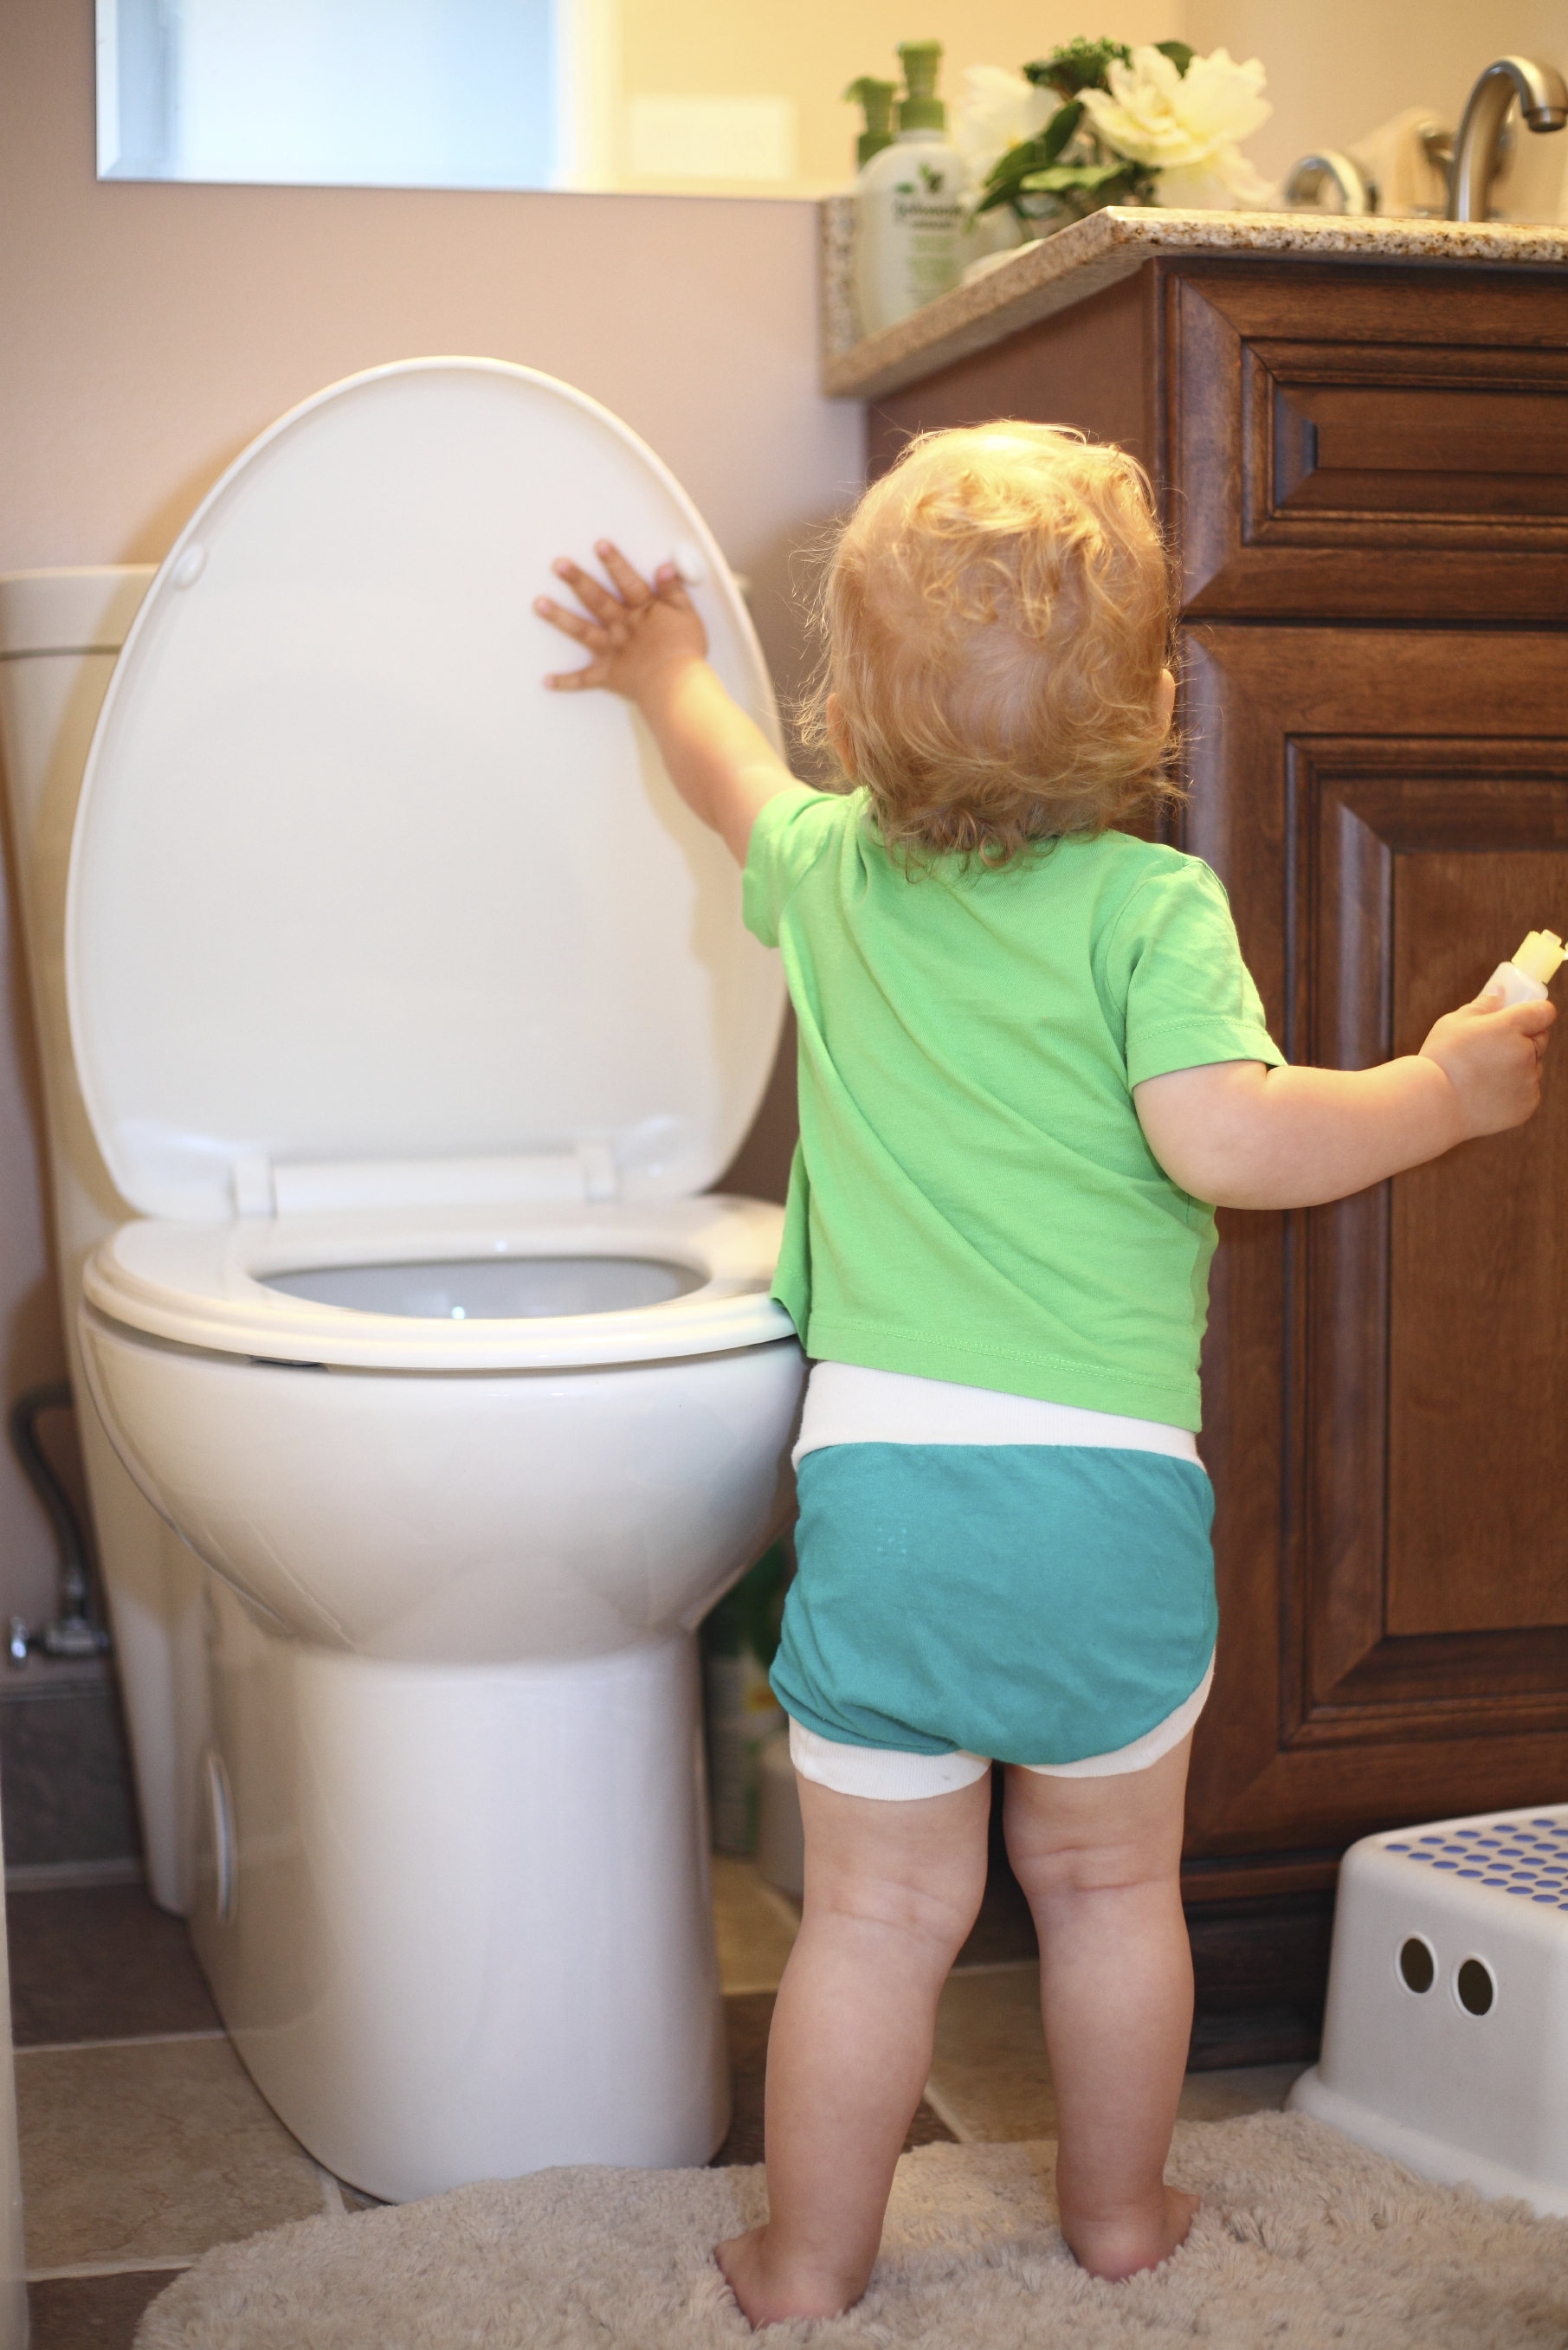 Childproofing a Water Hazard in Your Home - the Toilet!